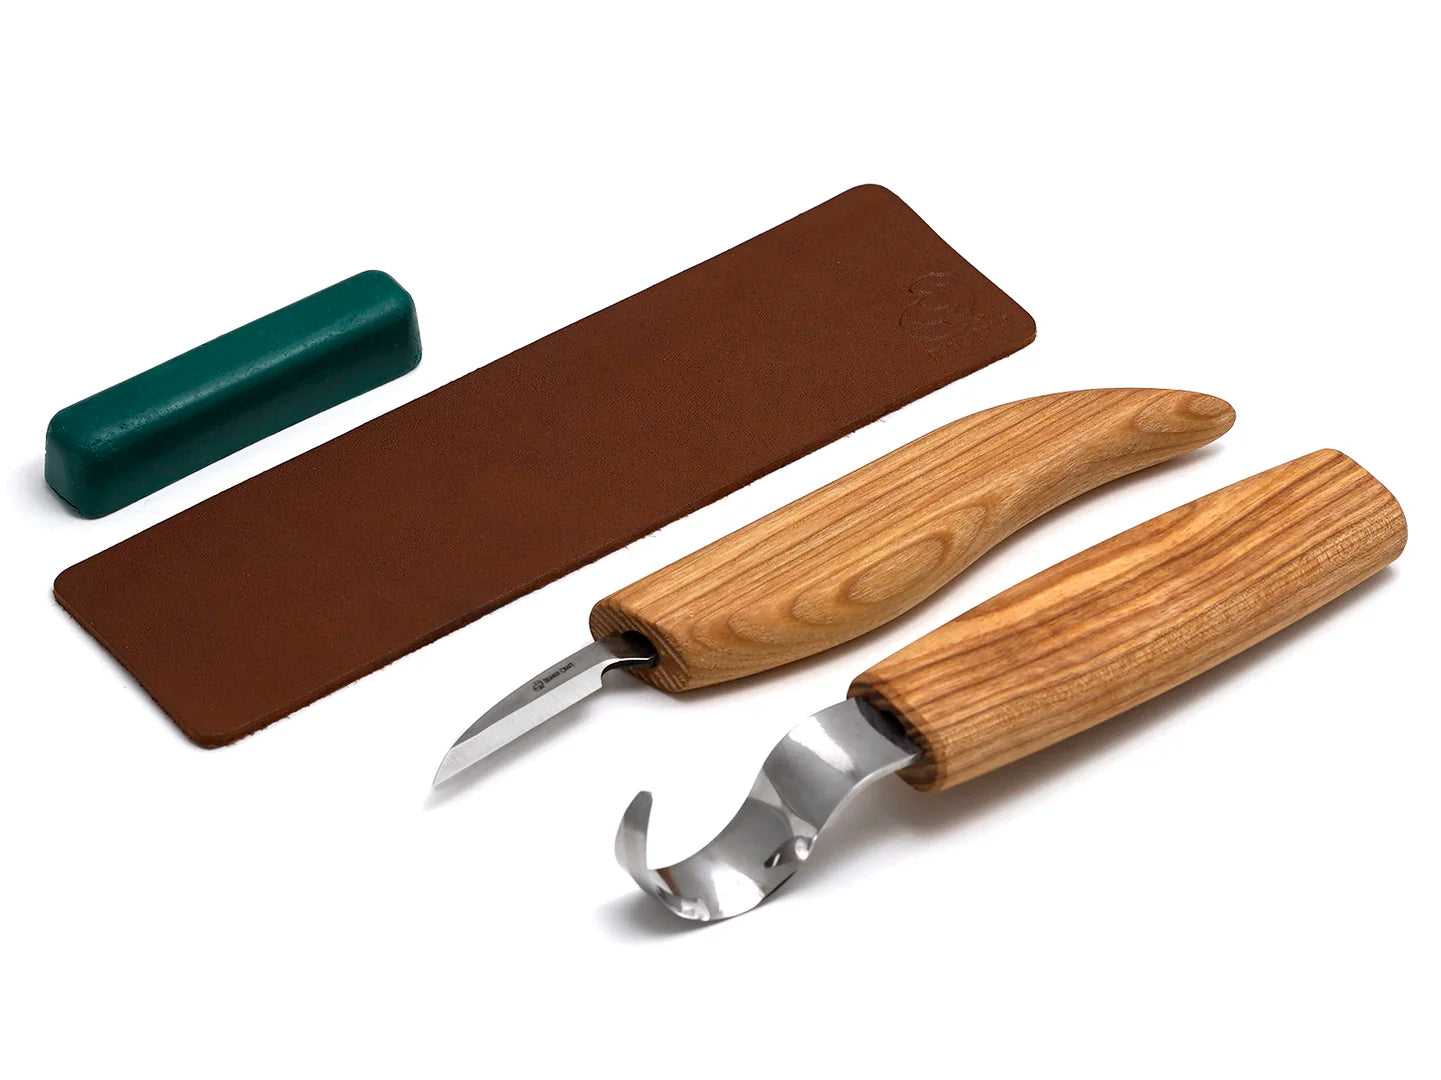 S02 – Spoon Carving Set with Detail Knife